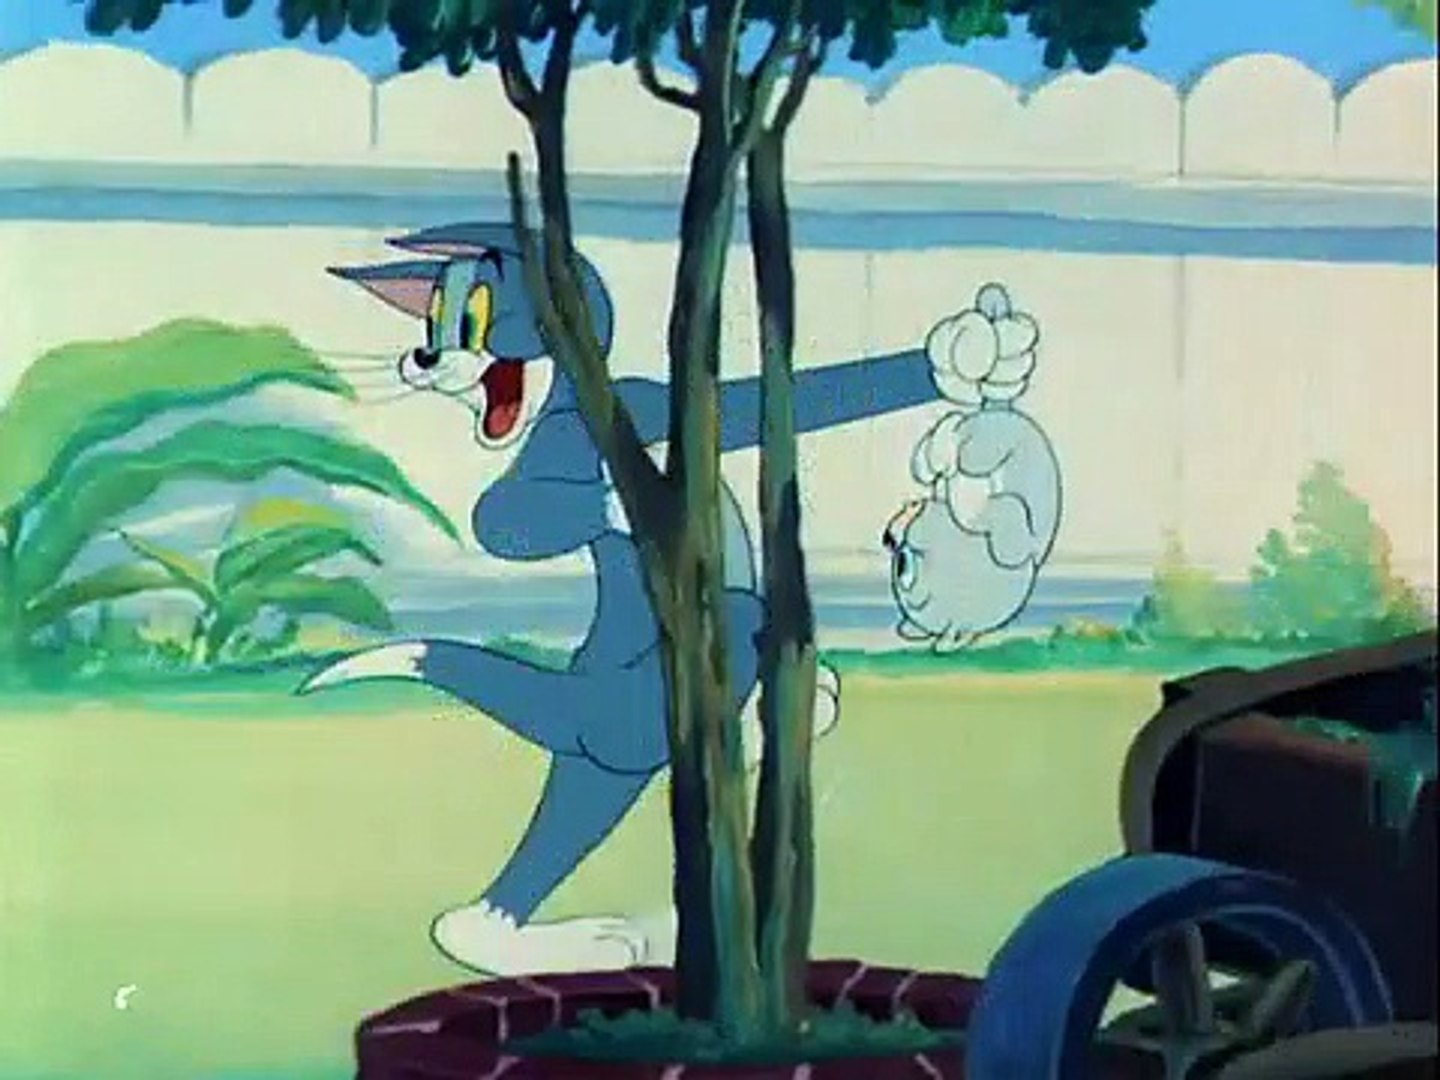 Tom And Jerry, ep 44 - Love That Pup (1949) - video Dailymotion